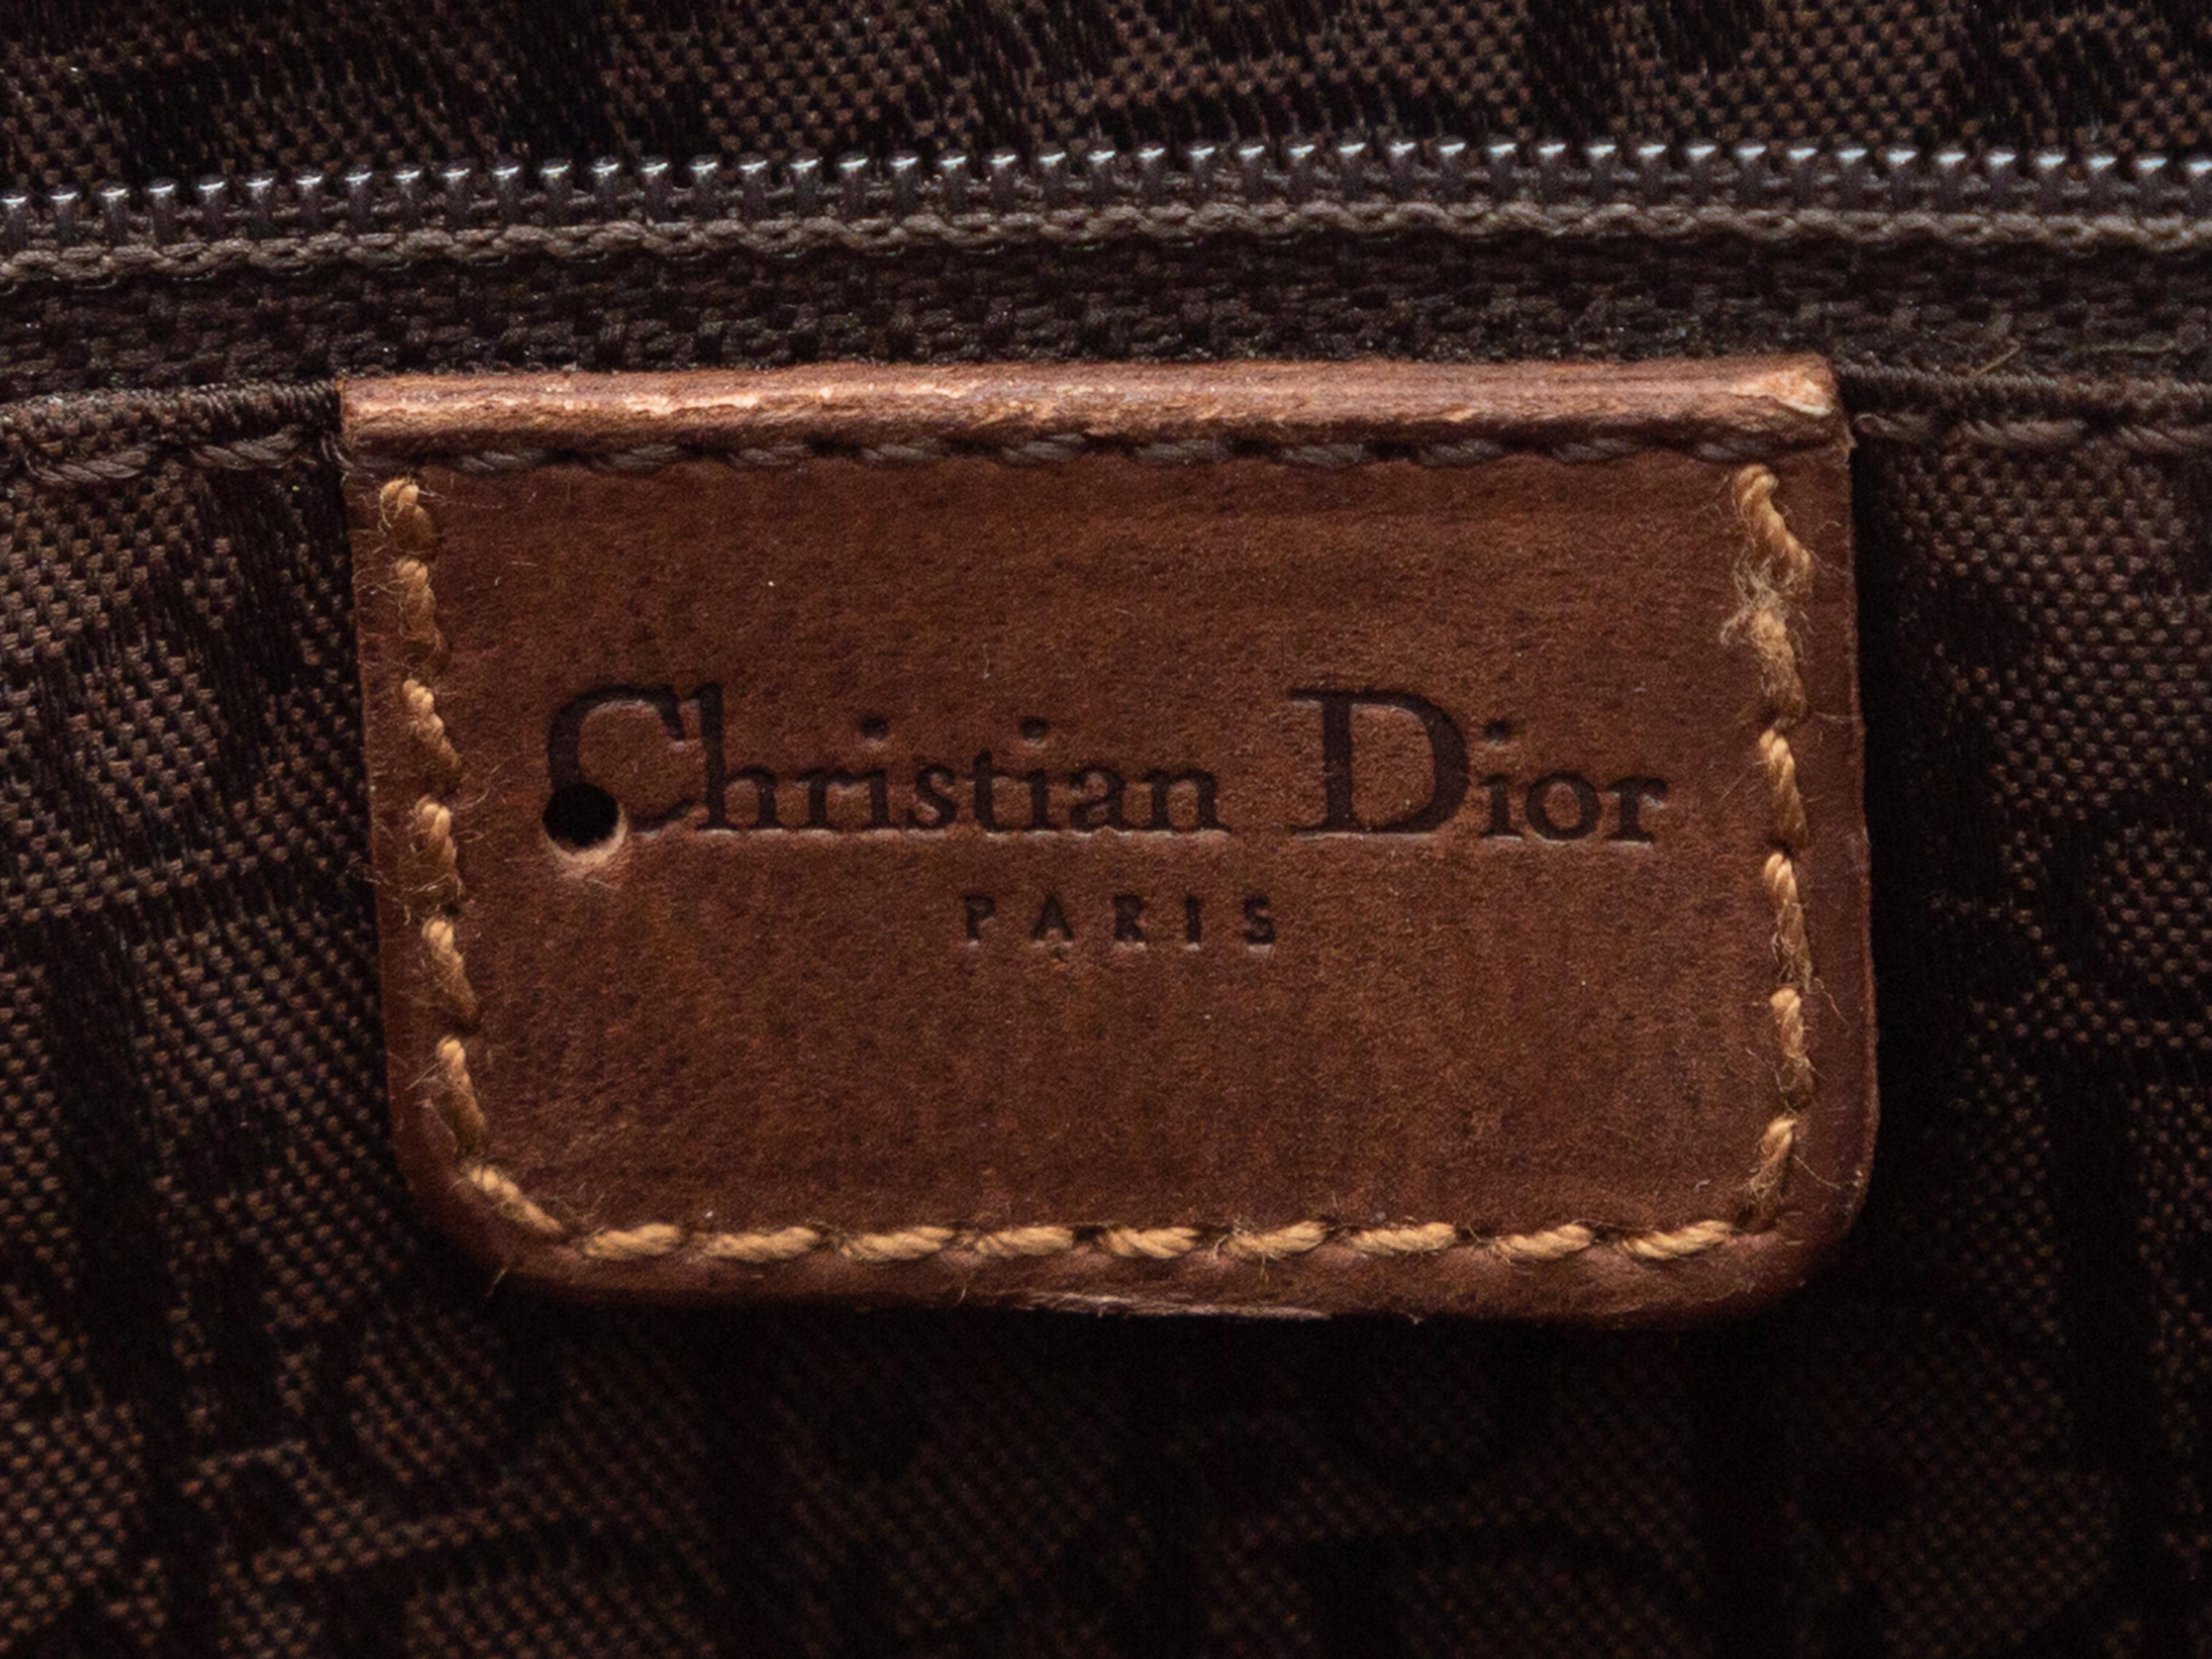 Product Details: Dark Blue & Brown Christian Dior Denim 2002 Handbag. This bag features a denim body, leather trim, gold-tone hardware, Oblique lining, dual top handles, and a zip closure at the top. 17